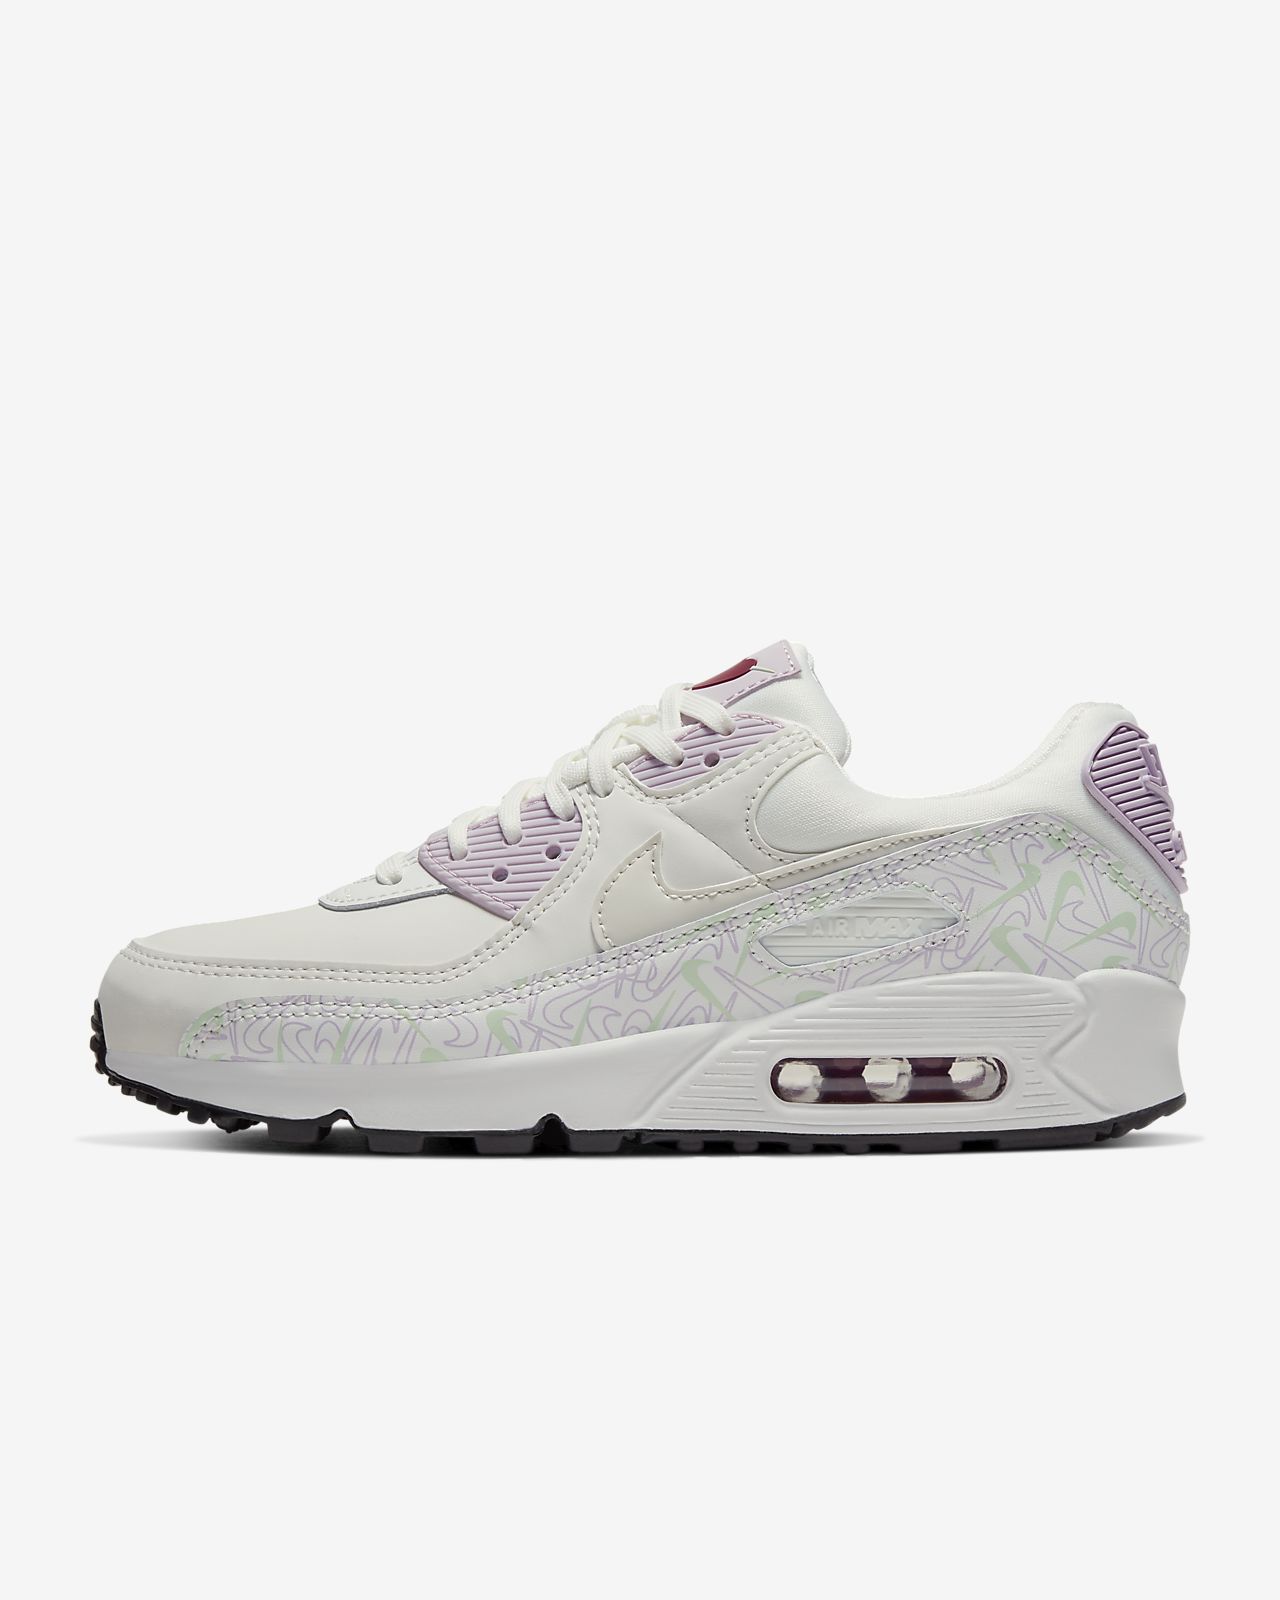 womens nike air max 90 off 57% - www.intolegalworld.com